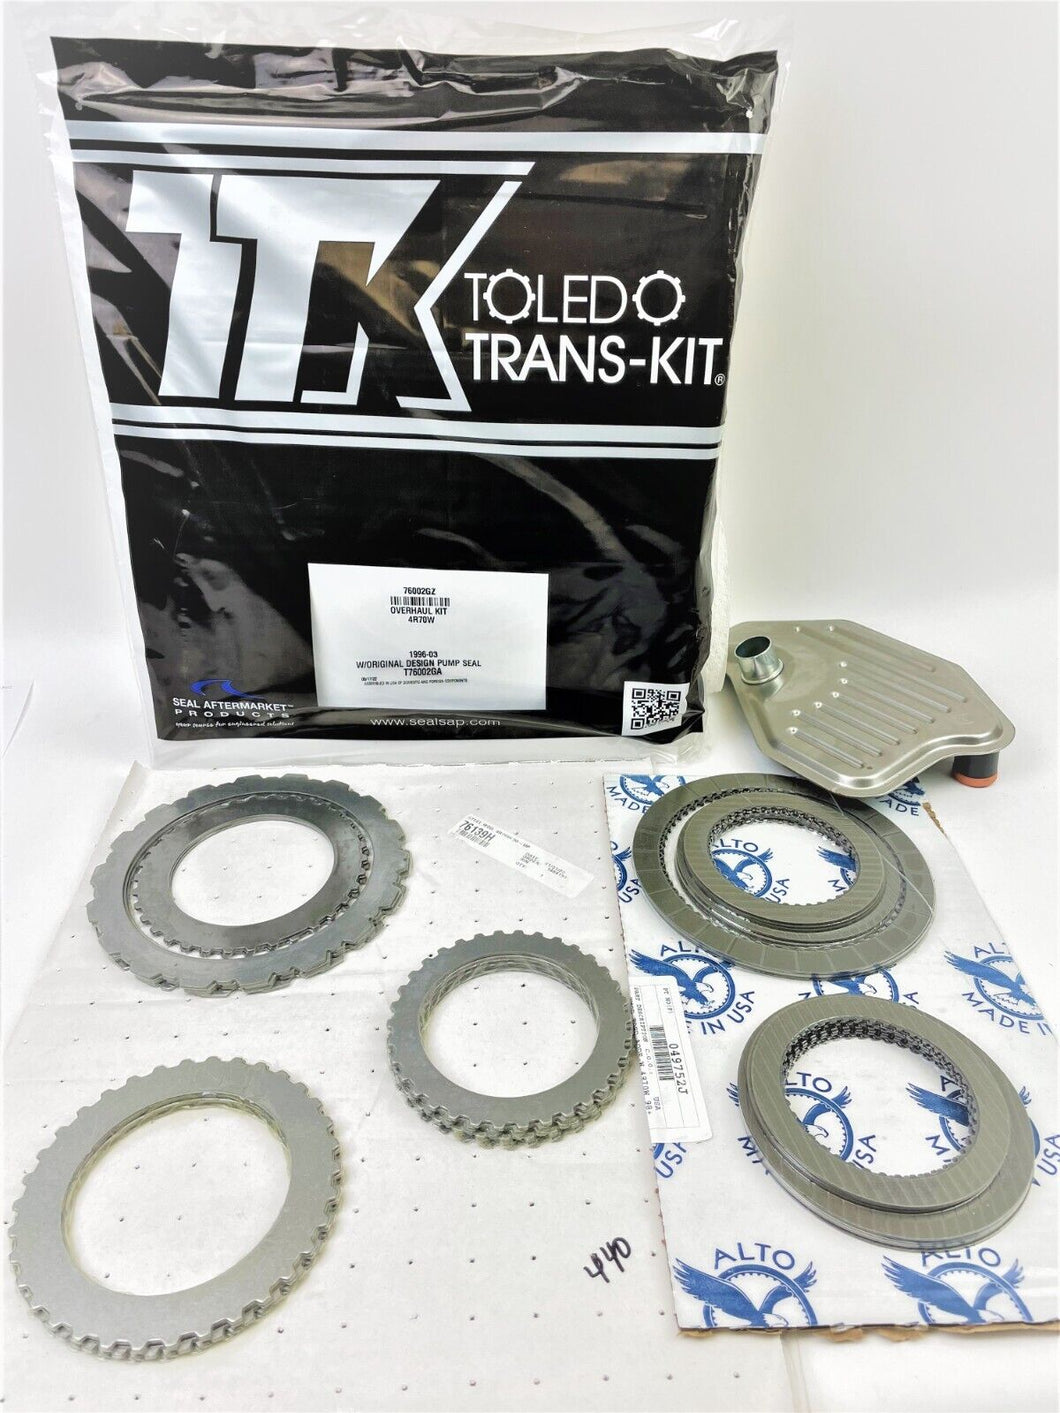 4R70W TRANSMISSION MASTER REBUILD KIT 1996-2003 with Alto Clutches and Filter